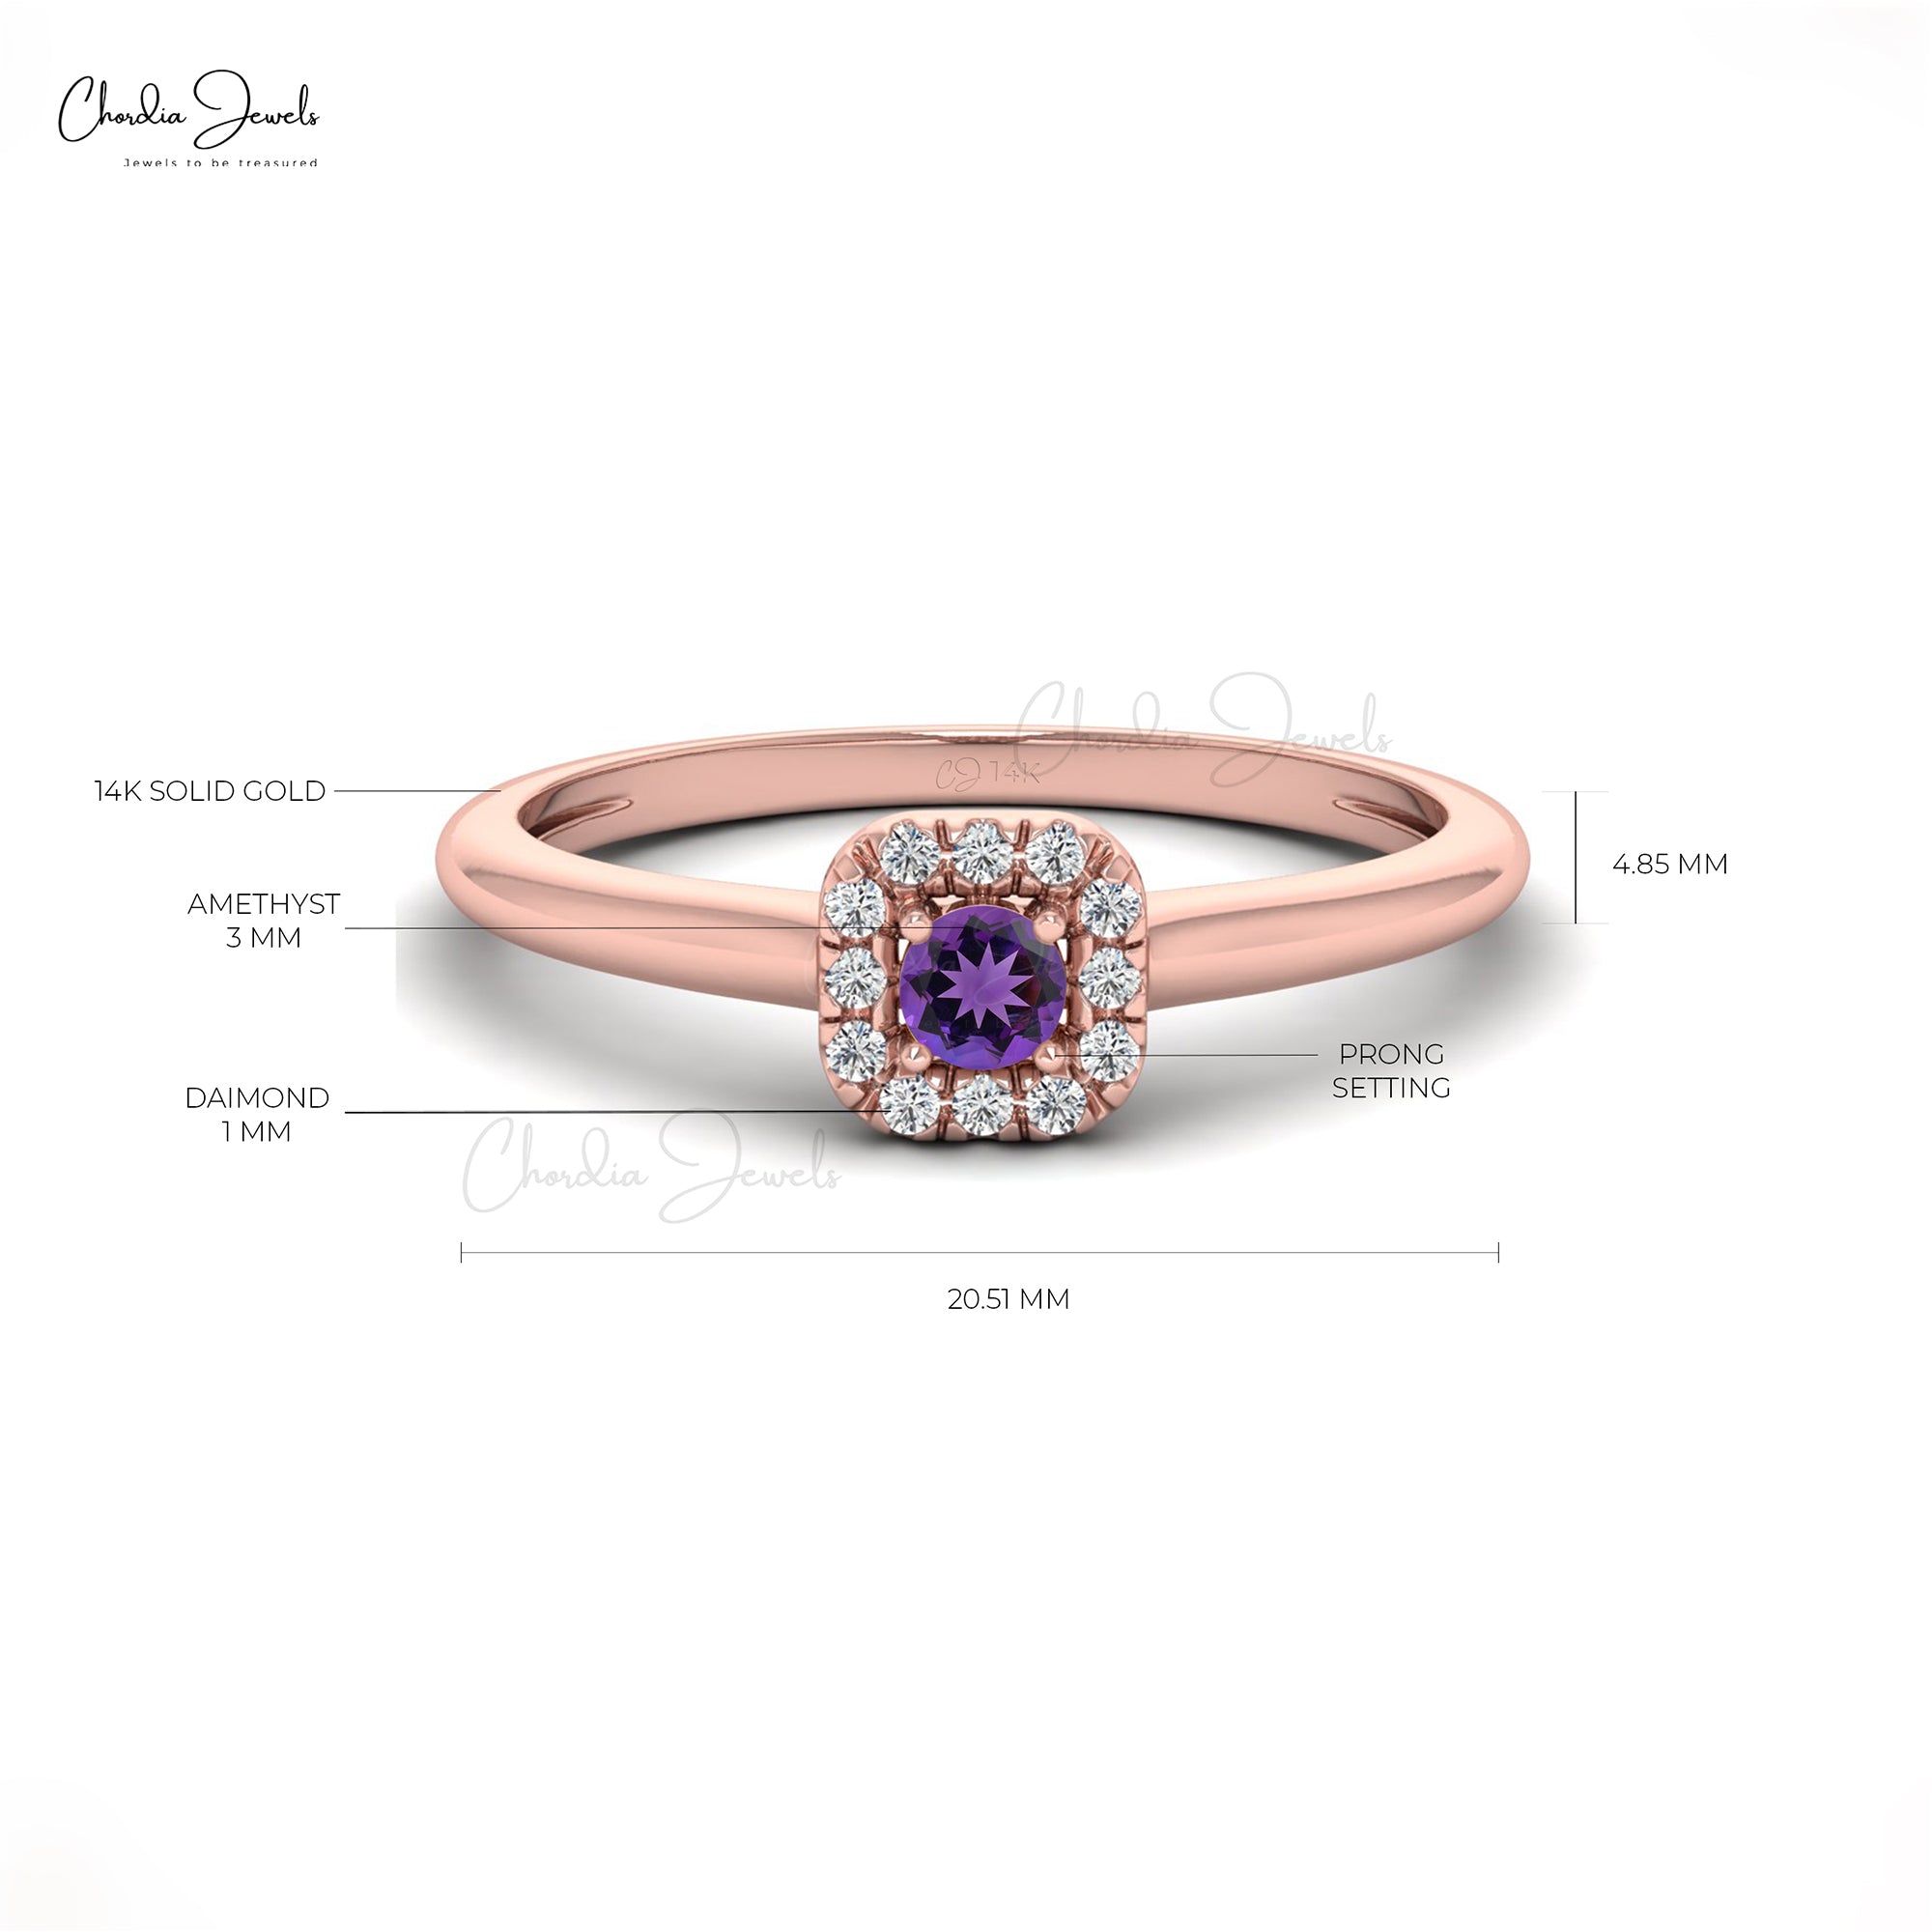 Galaxy Gold Size 6.0 14K Solid White Gold Ring with Natural Diamonds &  Heart Natural Purple Amethyst Grade AAA - Walmart.com